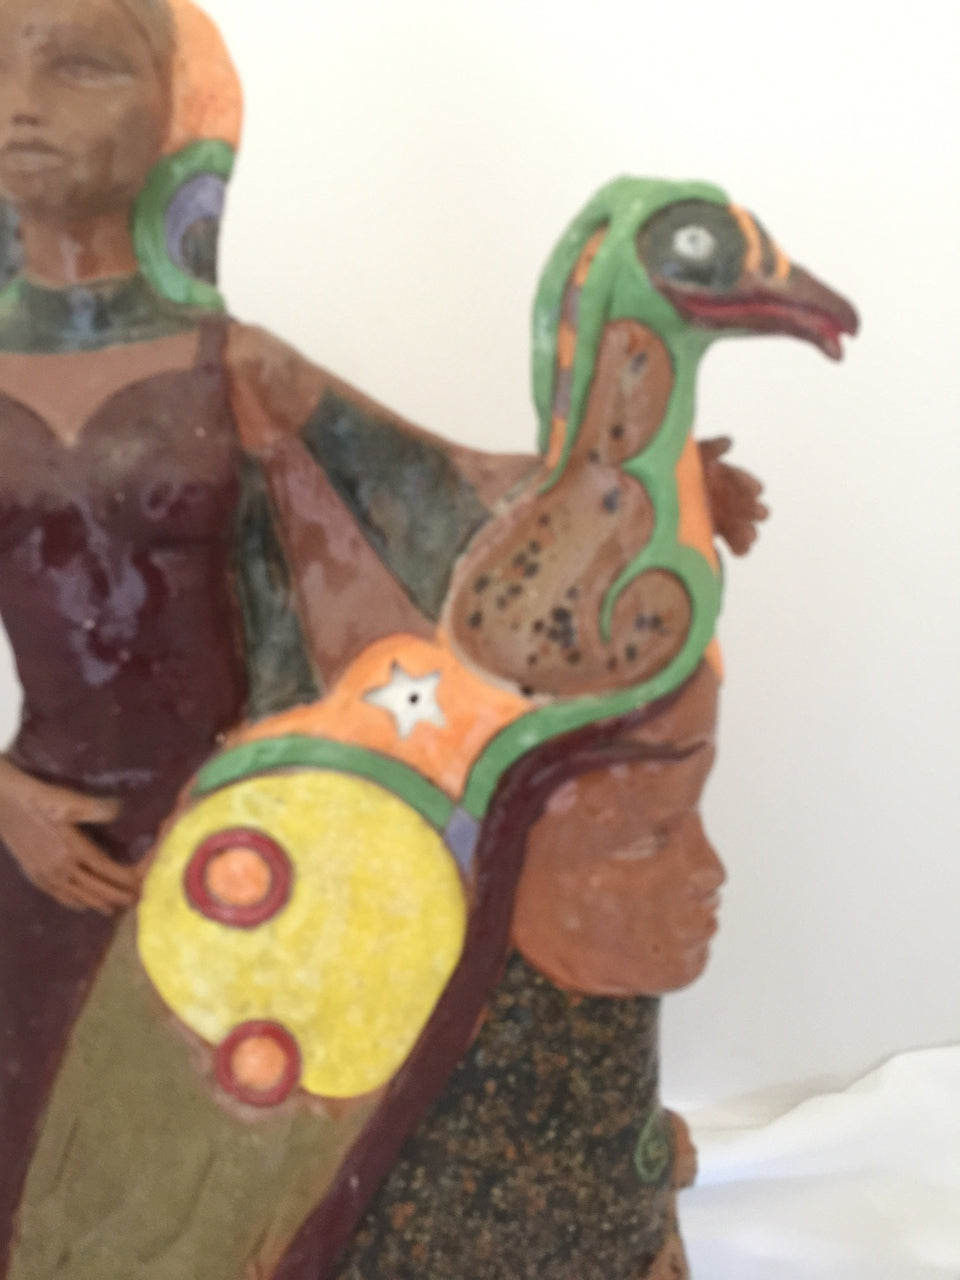 Black Mountain Clay Ceramic Sculpture "Lady with Bird"